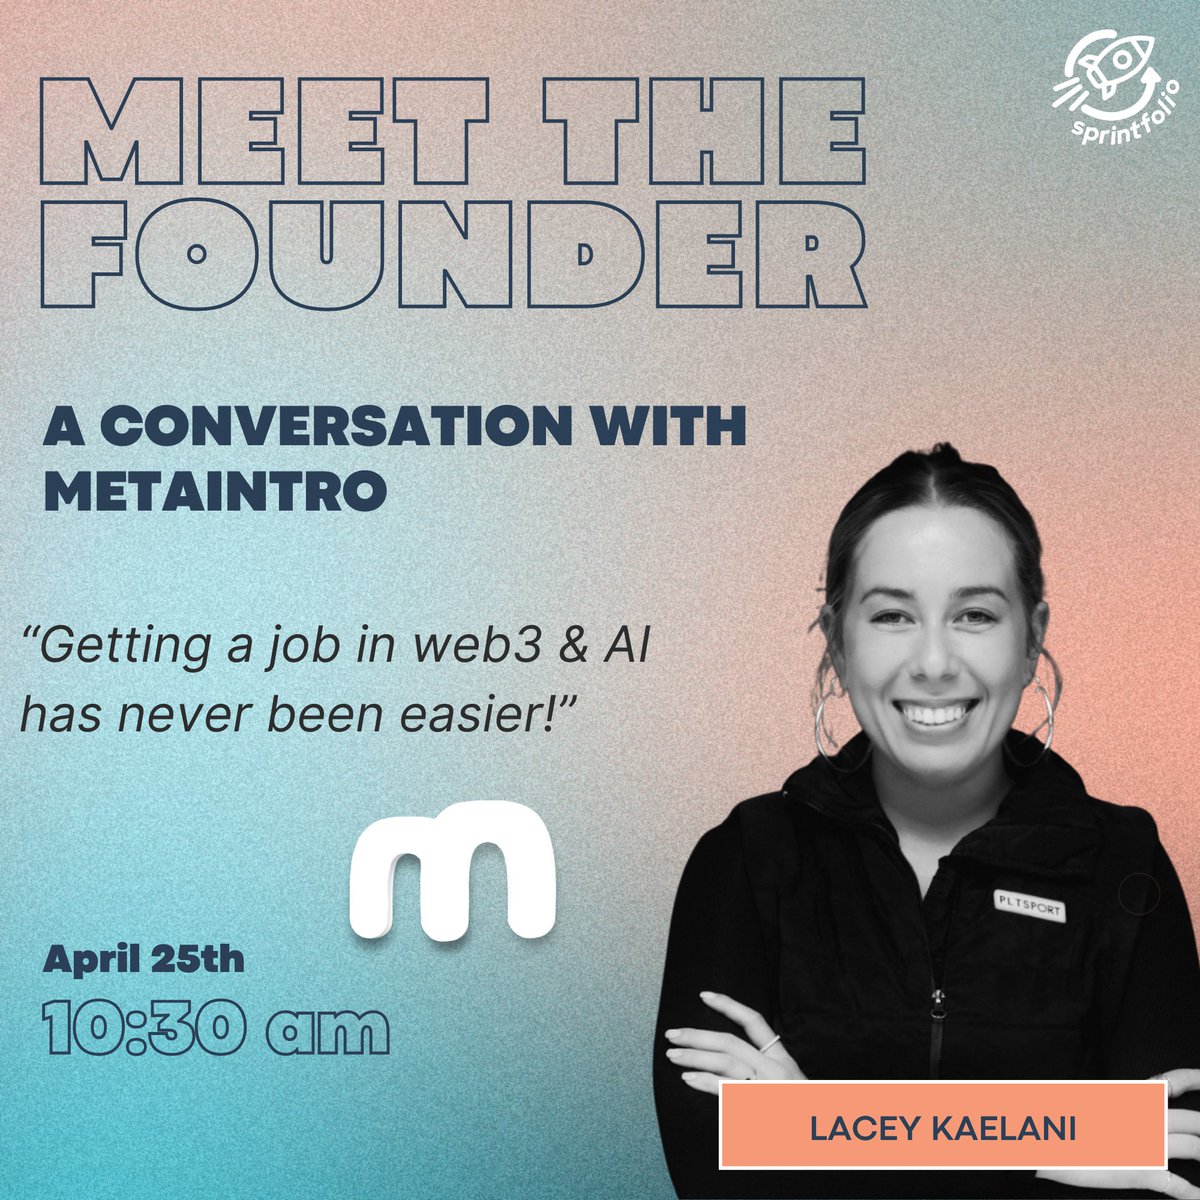 We are *beyond* excited for today's Meet the Founder talk with @metaintro founder @laceykaelani. Join us here at 10:30am EST:  loom.ly/PAW4Wpk
#sprintfolio #meetthefounder #linkedinlive